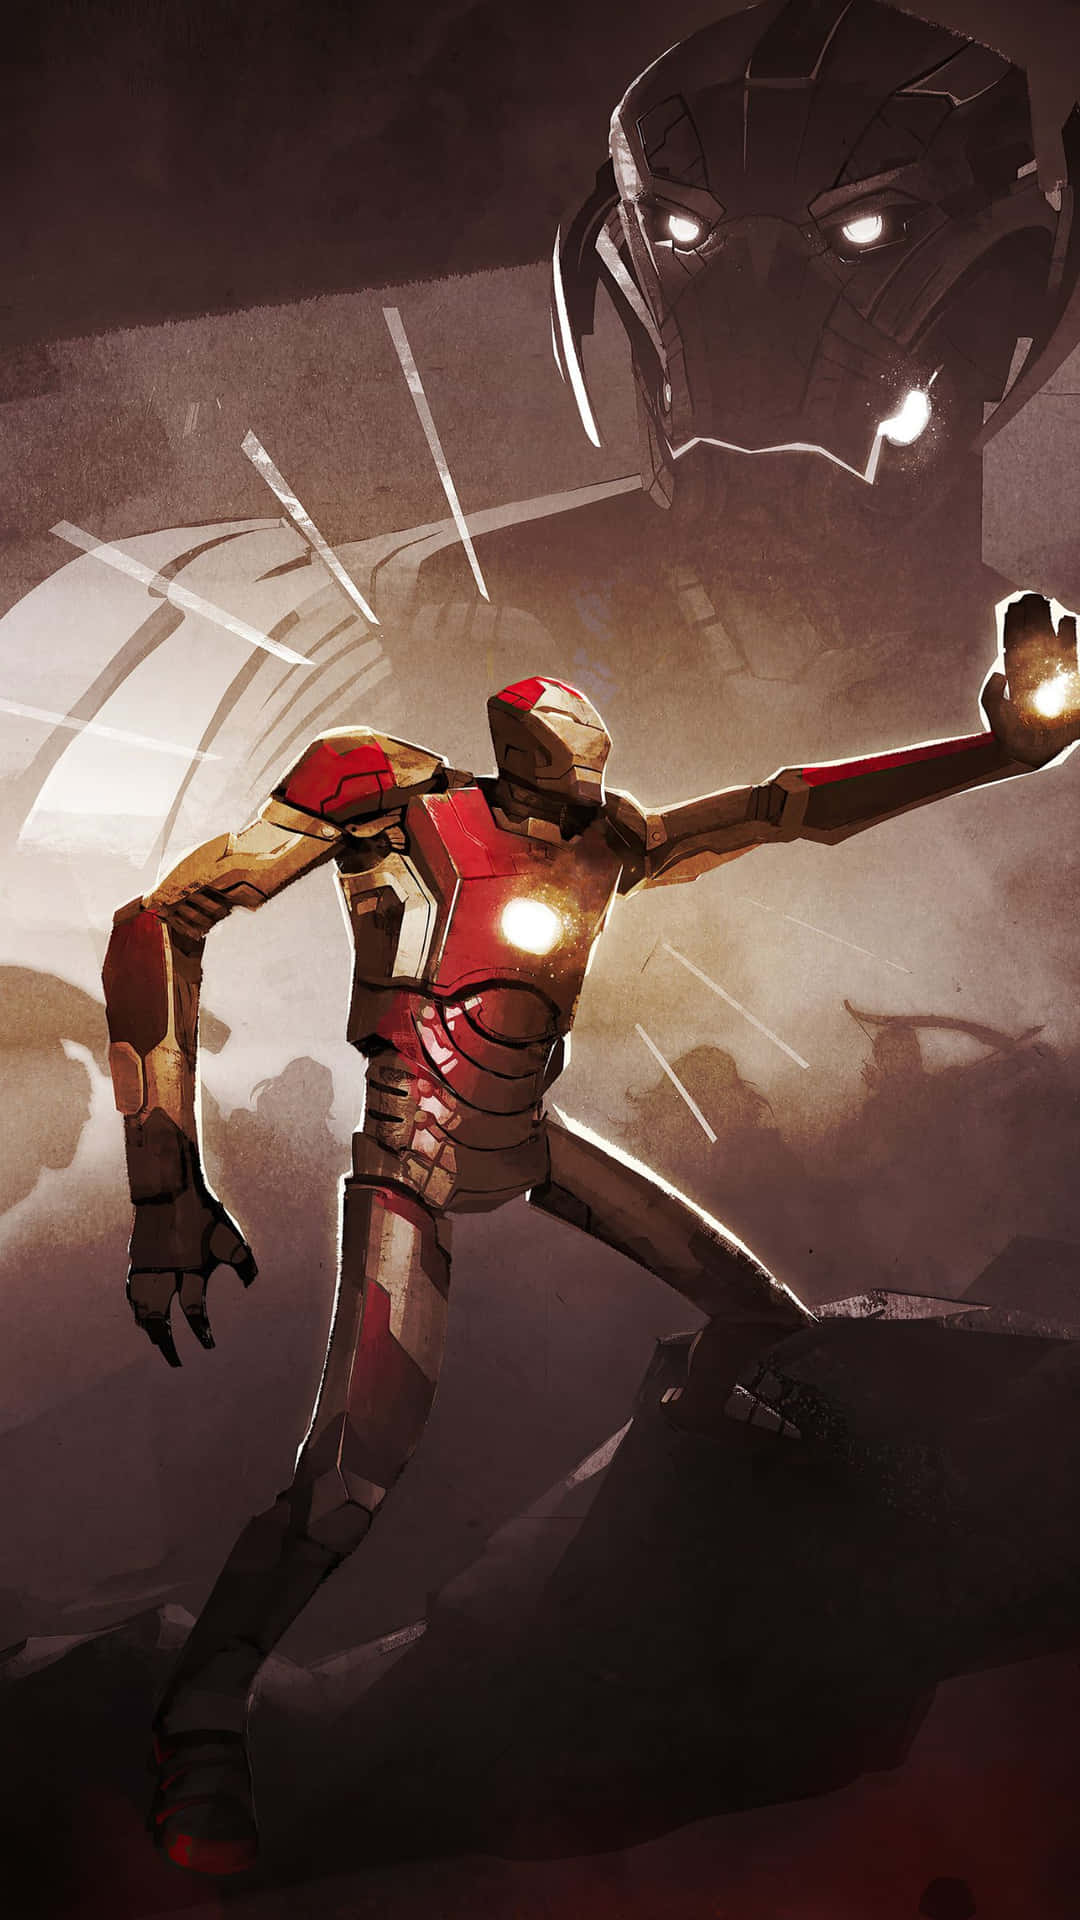 Battle ready! Tony Stark in his Iron Man suit fully prepared for battle with his trusty weapons." Wallpaper